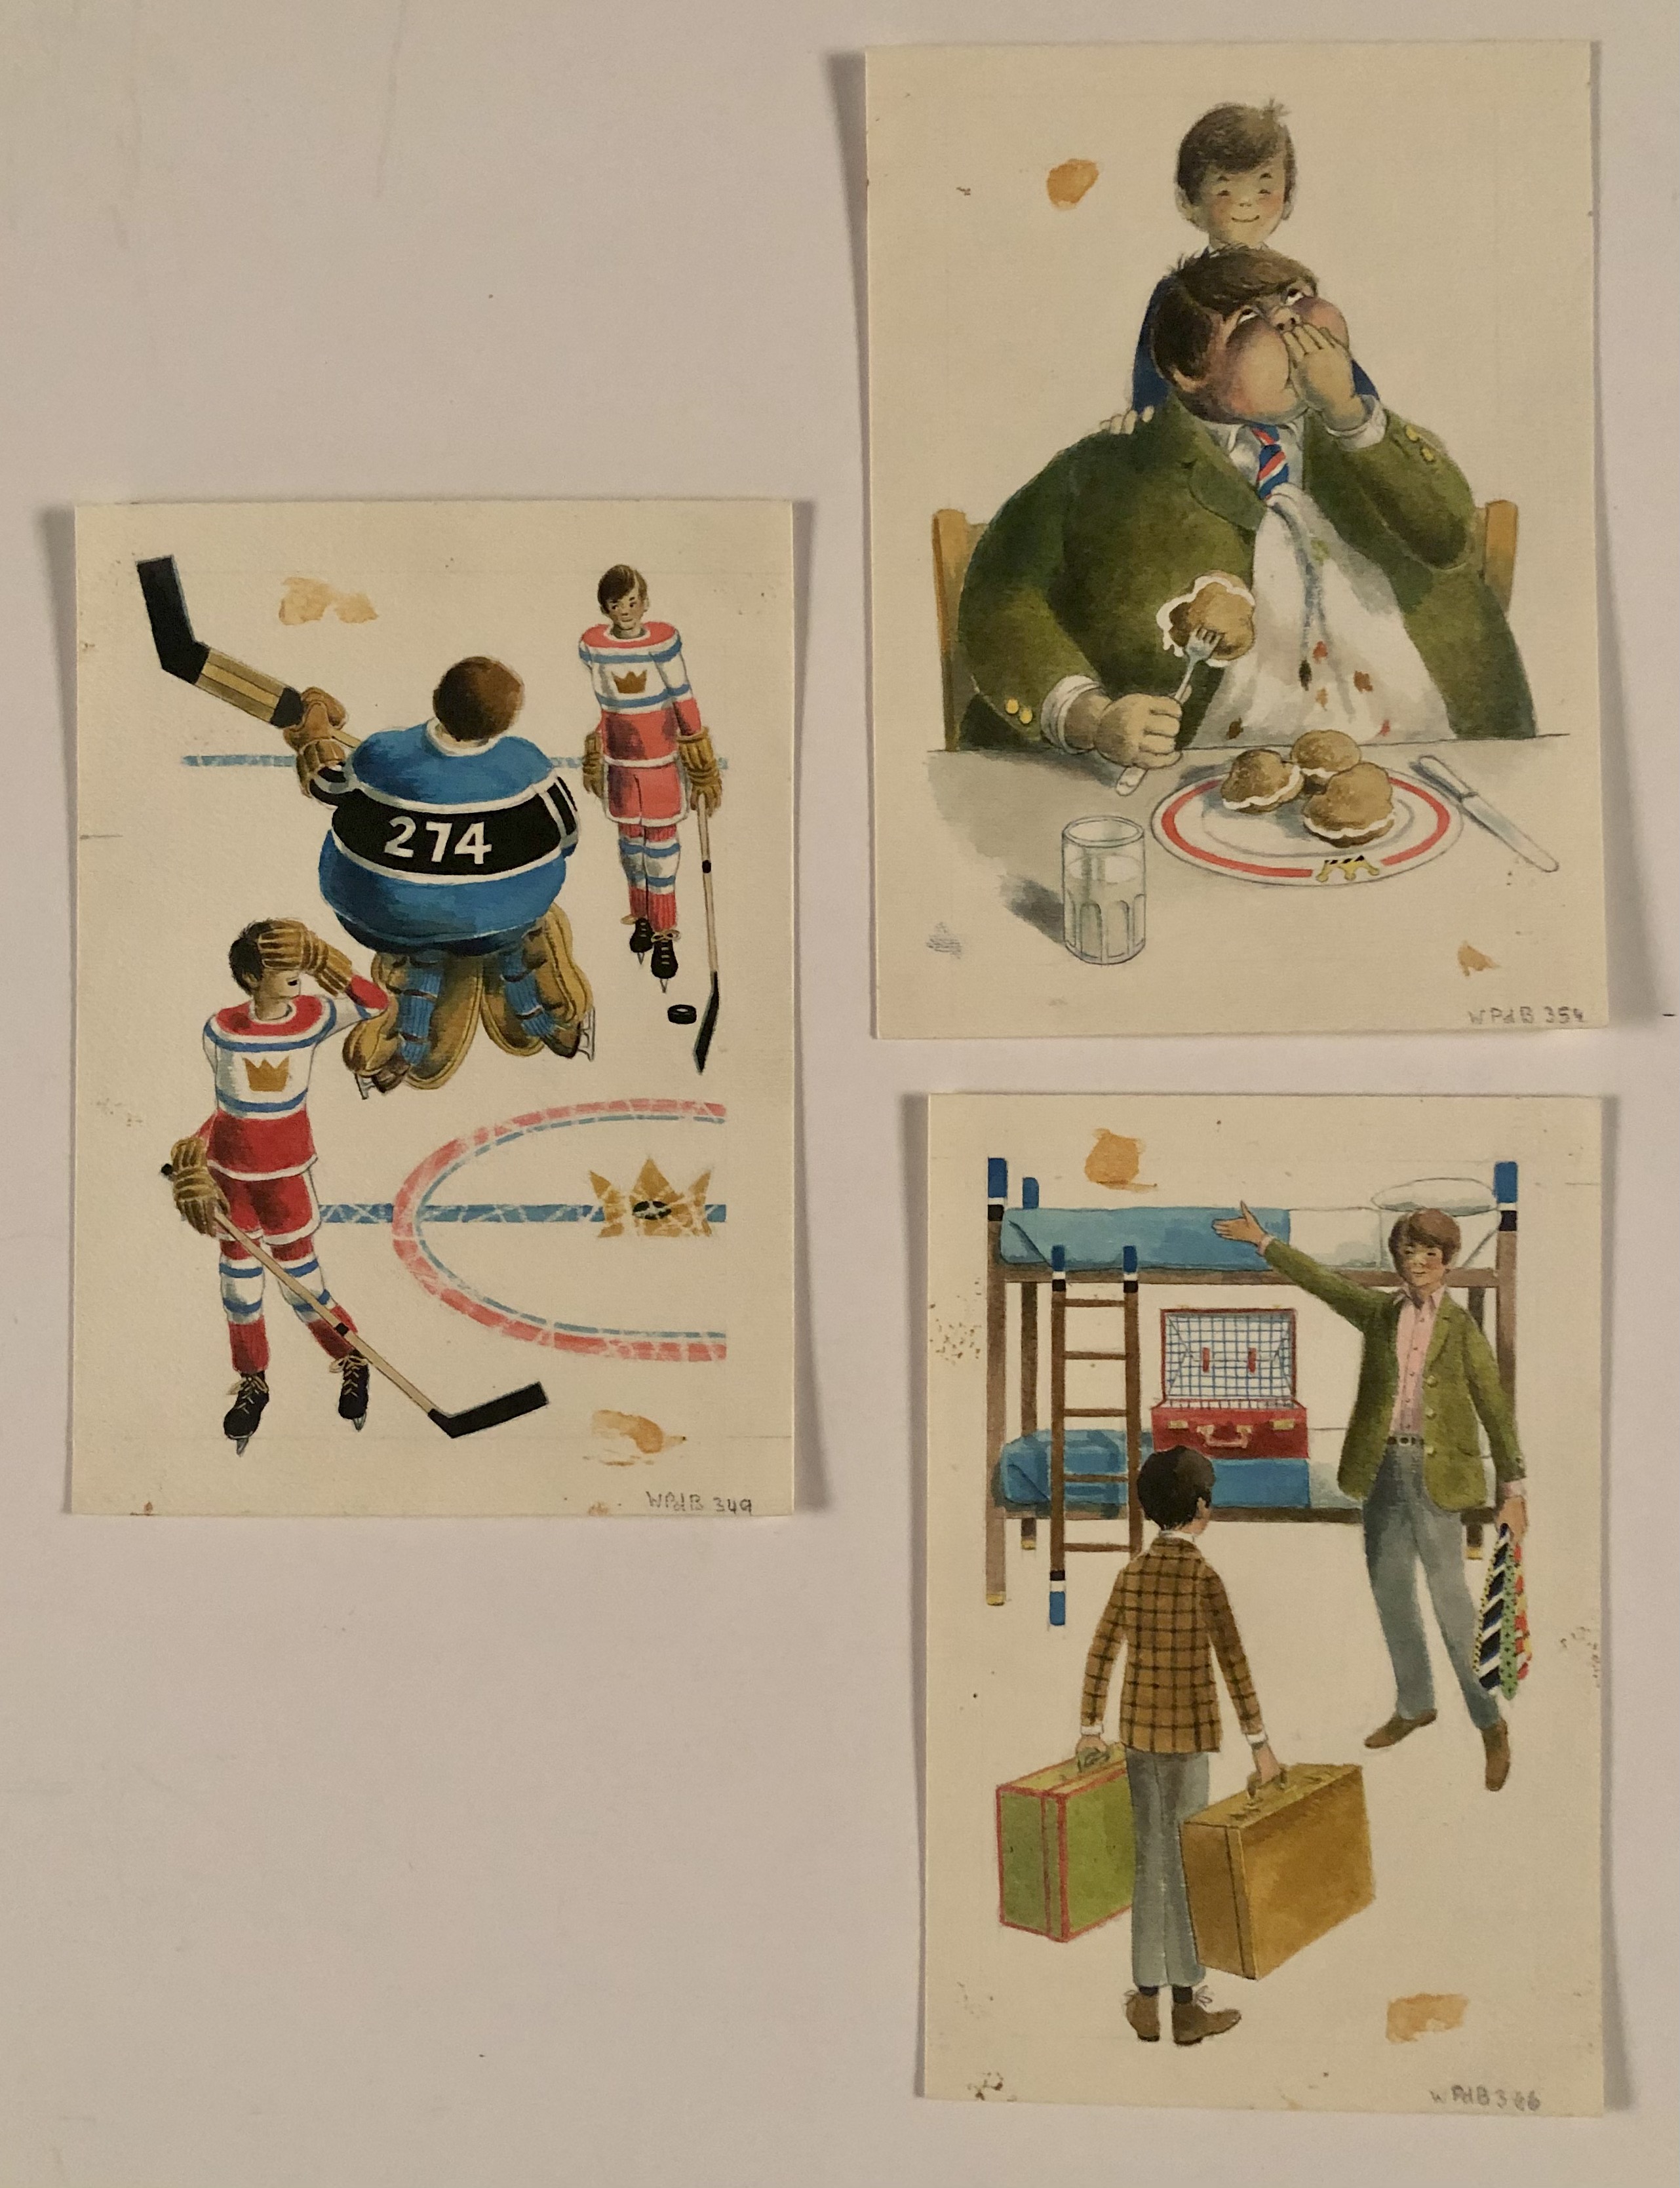 3 images - Porko playing hockey; Porko eating; and boys standing hear bunk bed